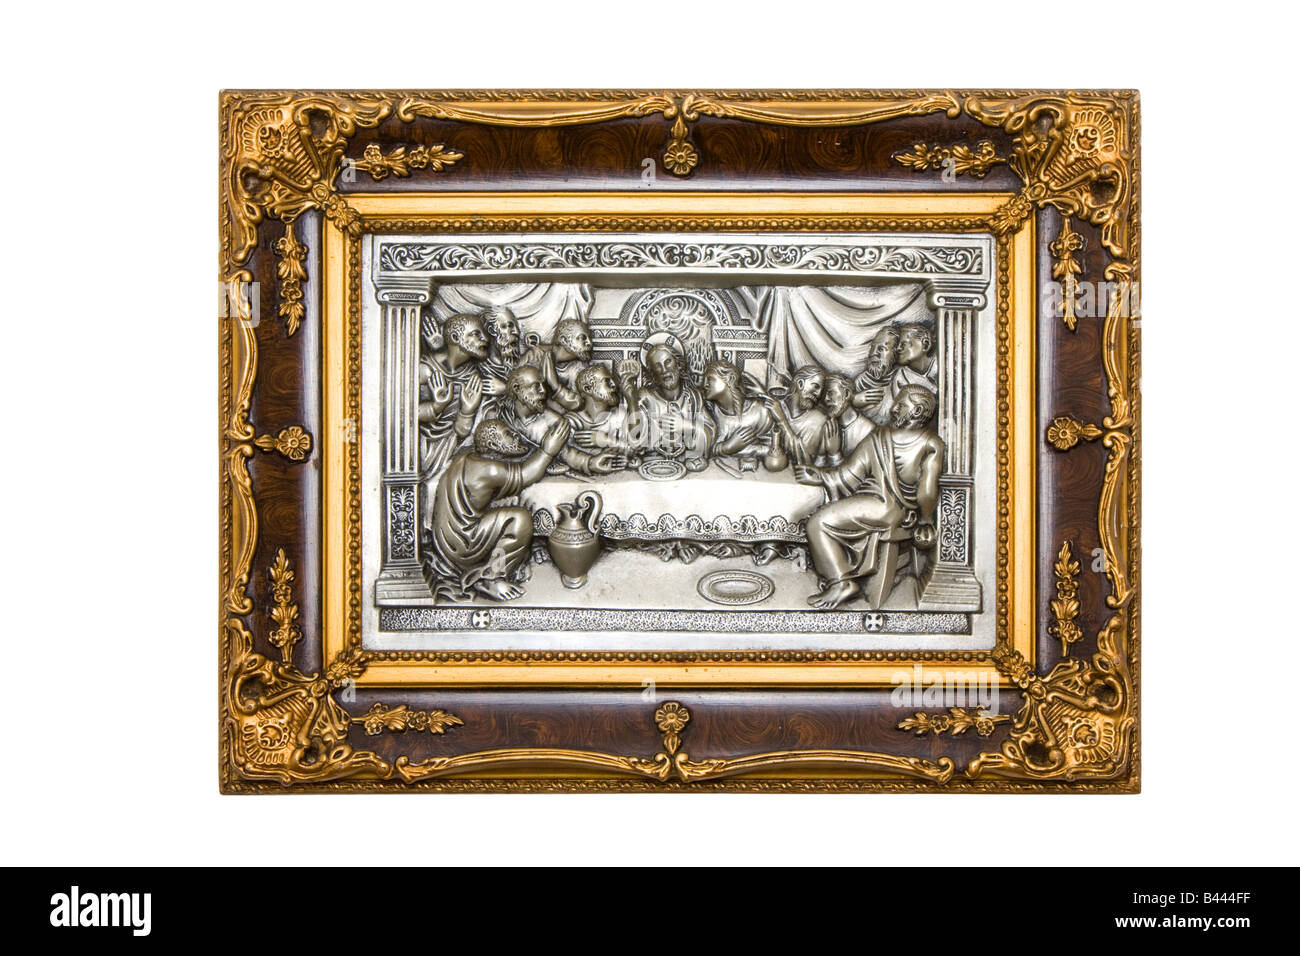 The Last Supper engraved in a metal plate. Stock Photo